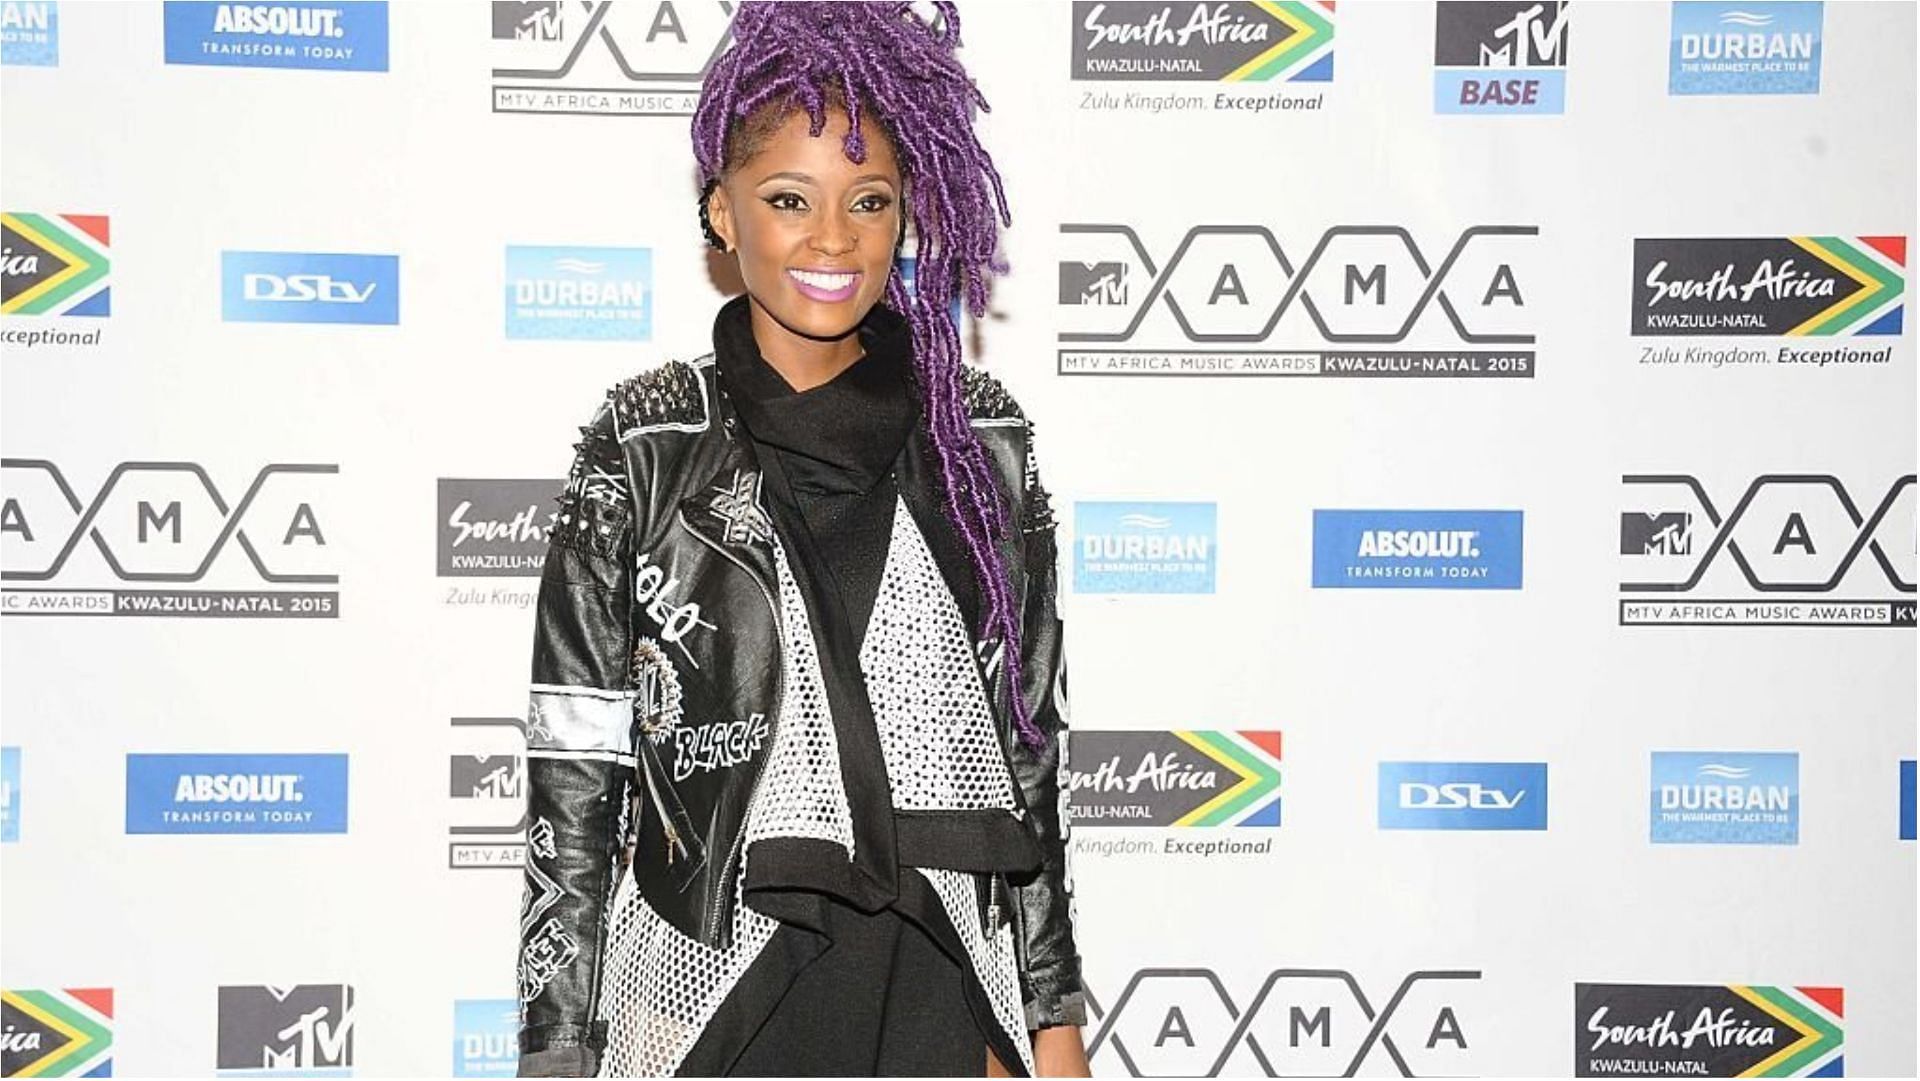 Vanessa Mdee is a singer, rapper, television personality, and host (Image via Frennie Shivambu/Getty Images)